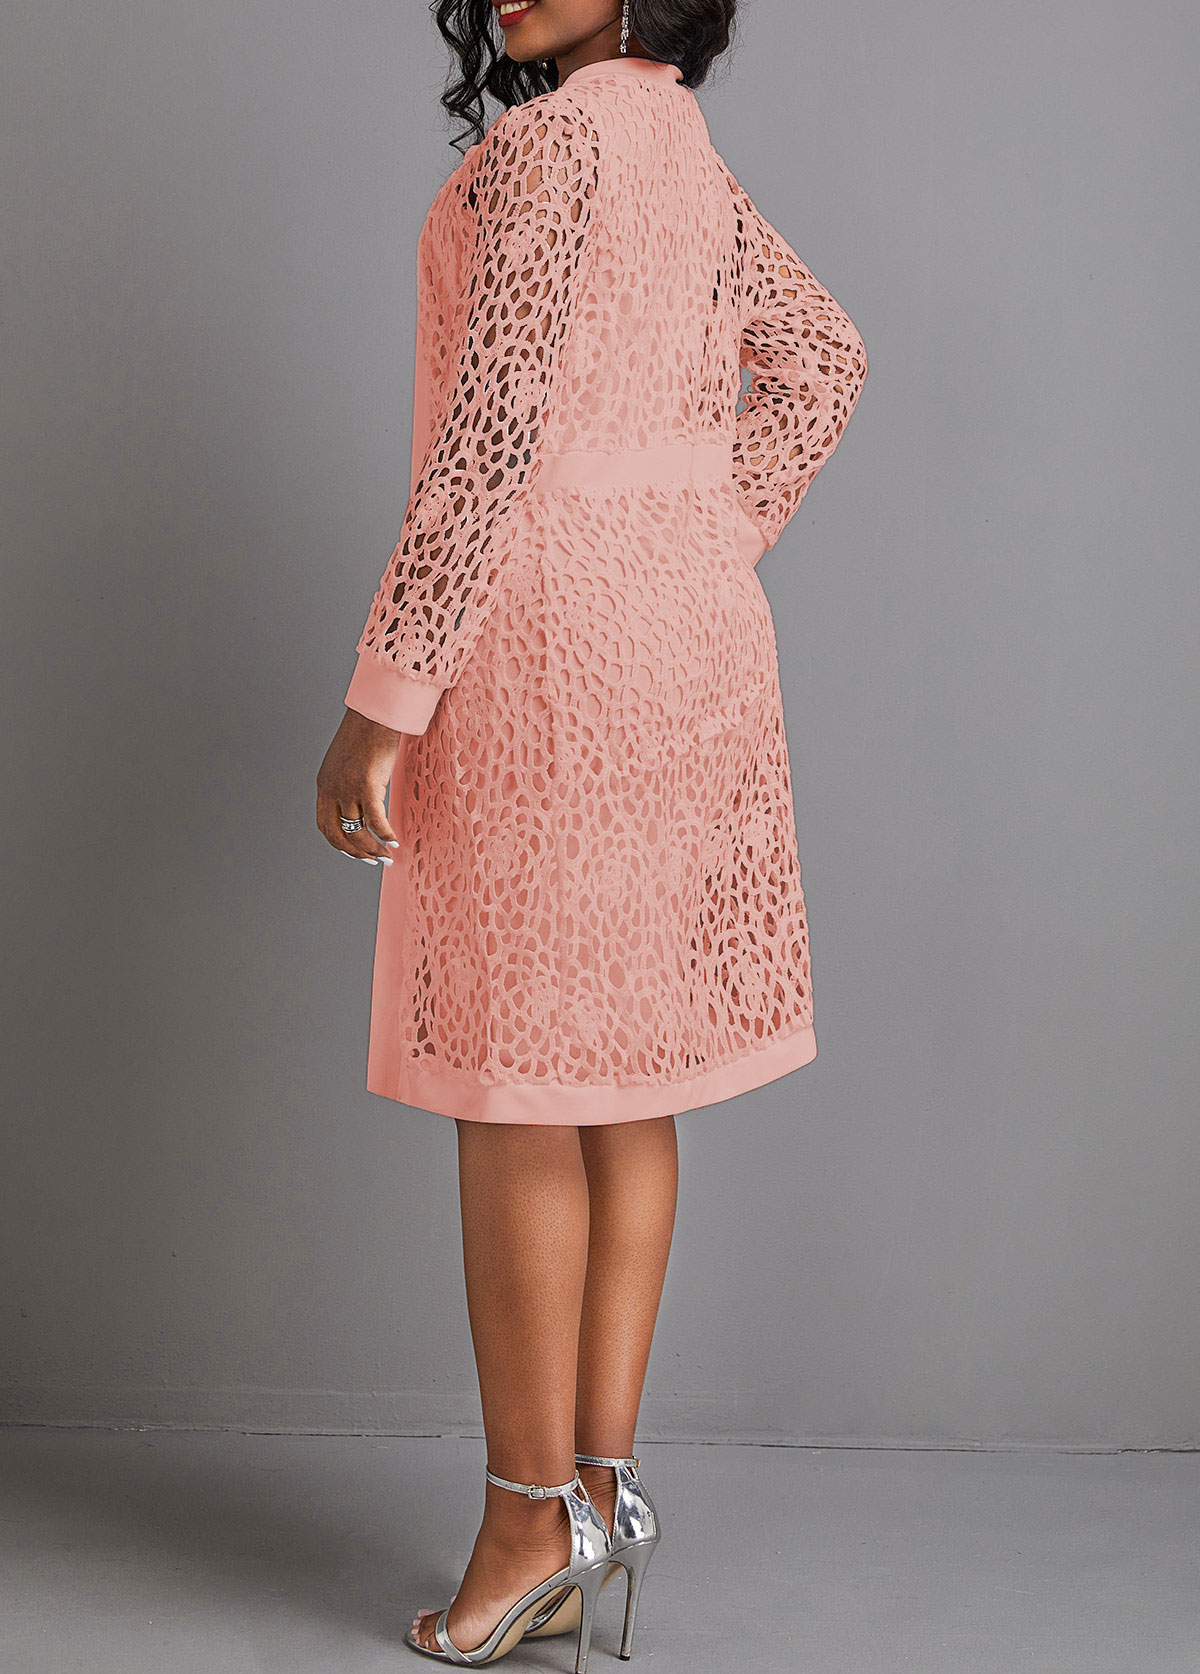 Round Neck Two Piece Pink Long Sleeve Dress and Cardigan